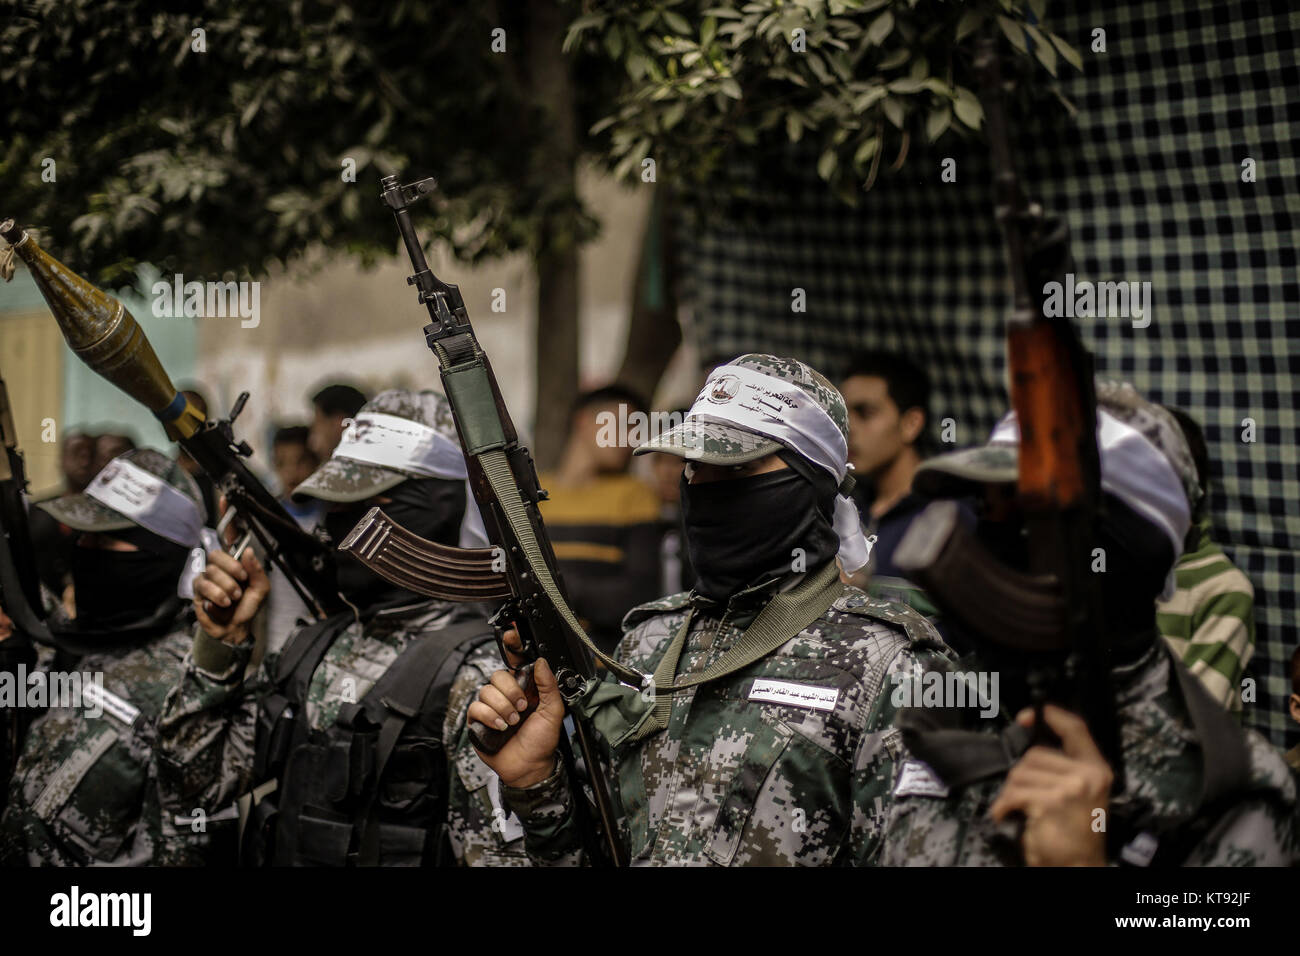 Armed members of Abd al-Qadir al-Husayni Brigades, one of the military branches of the Fatah organization, attend the protest funeral of 29-year-old Mohammed Mohaisen in Gaza City, Gaza Strip, the Palestinian Territories, 23 December 2017. A day earlier, Mohaisen was killed during clashes with Israeli soldiers following protests against US President Donald Trump's decision to recognise Jerusalem as the capital of Israel. Photo: Mohammed Talatene/dpa Stock Photo